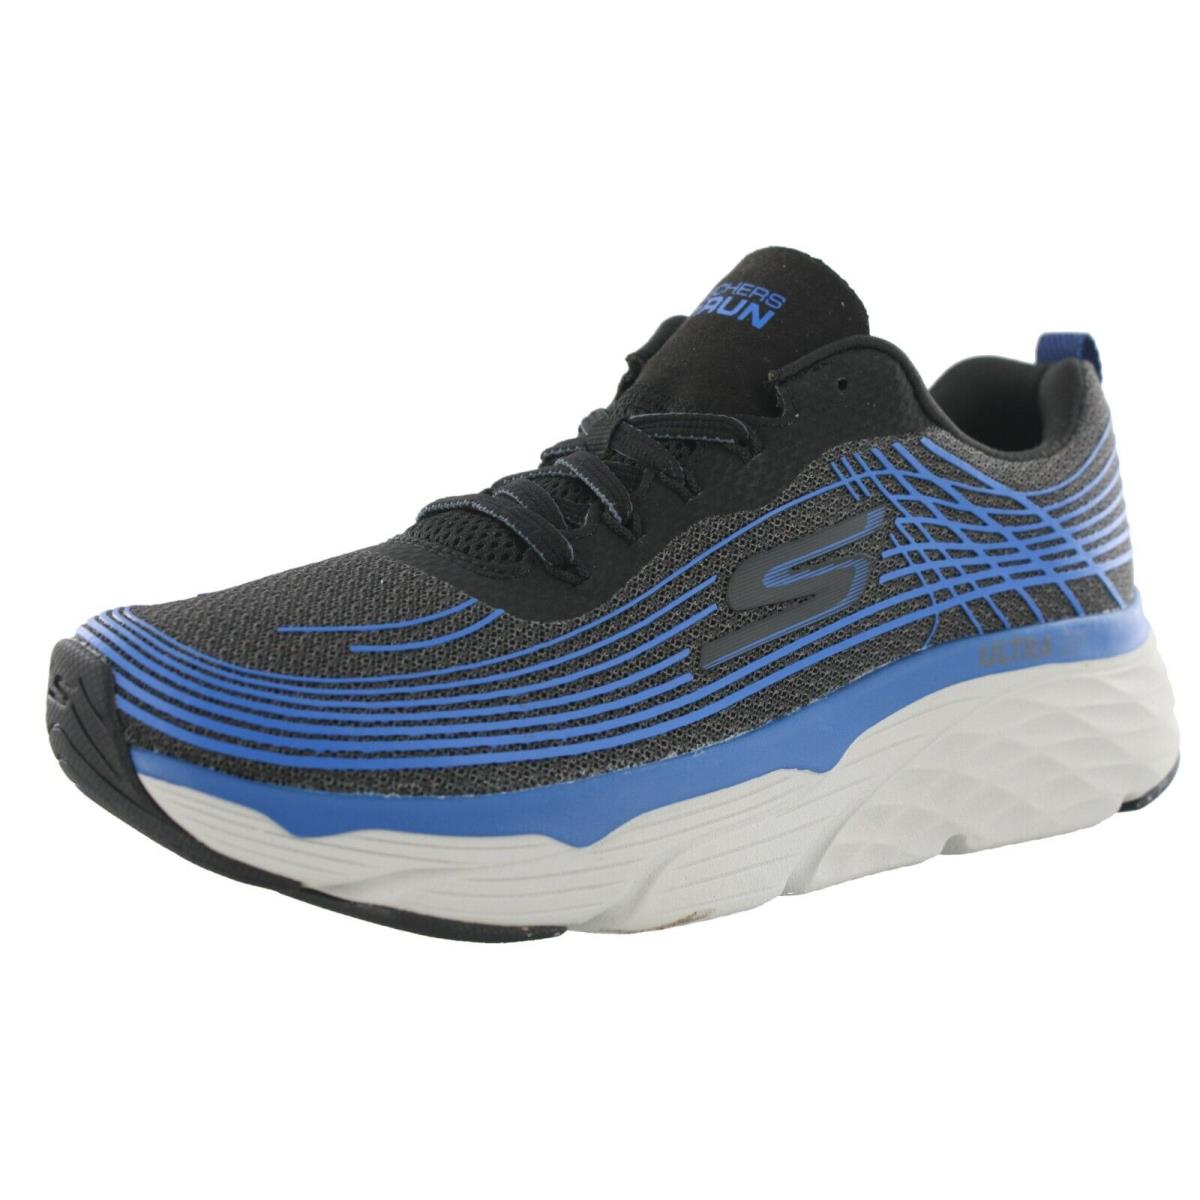 Skechers Men`s Max Cushioning Elite 54430 Bkbl Lace-up Running Shoes